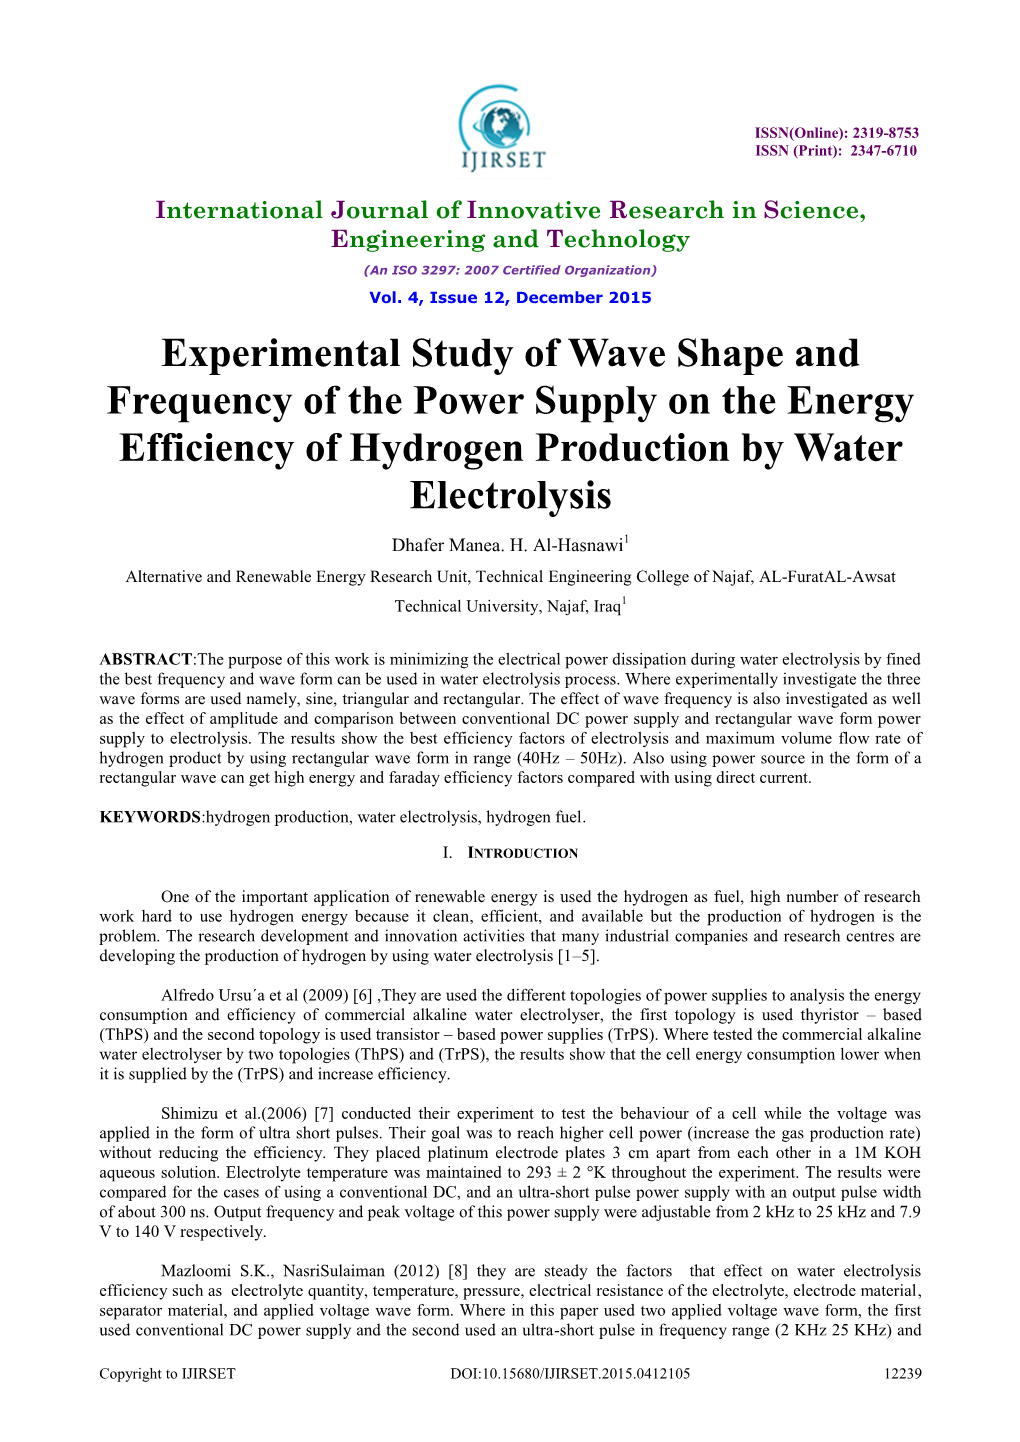 Experimental Study of Wave Shape and Frequency of the Power Supply on the Energy Efficiency of Hydrogen Production by Water Electrolysis